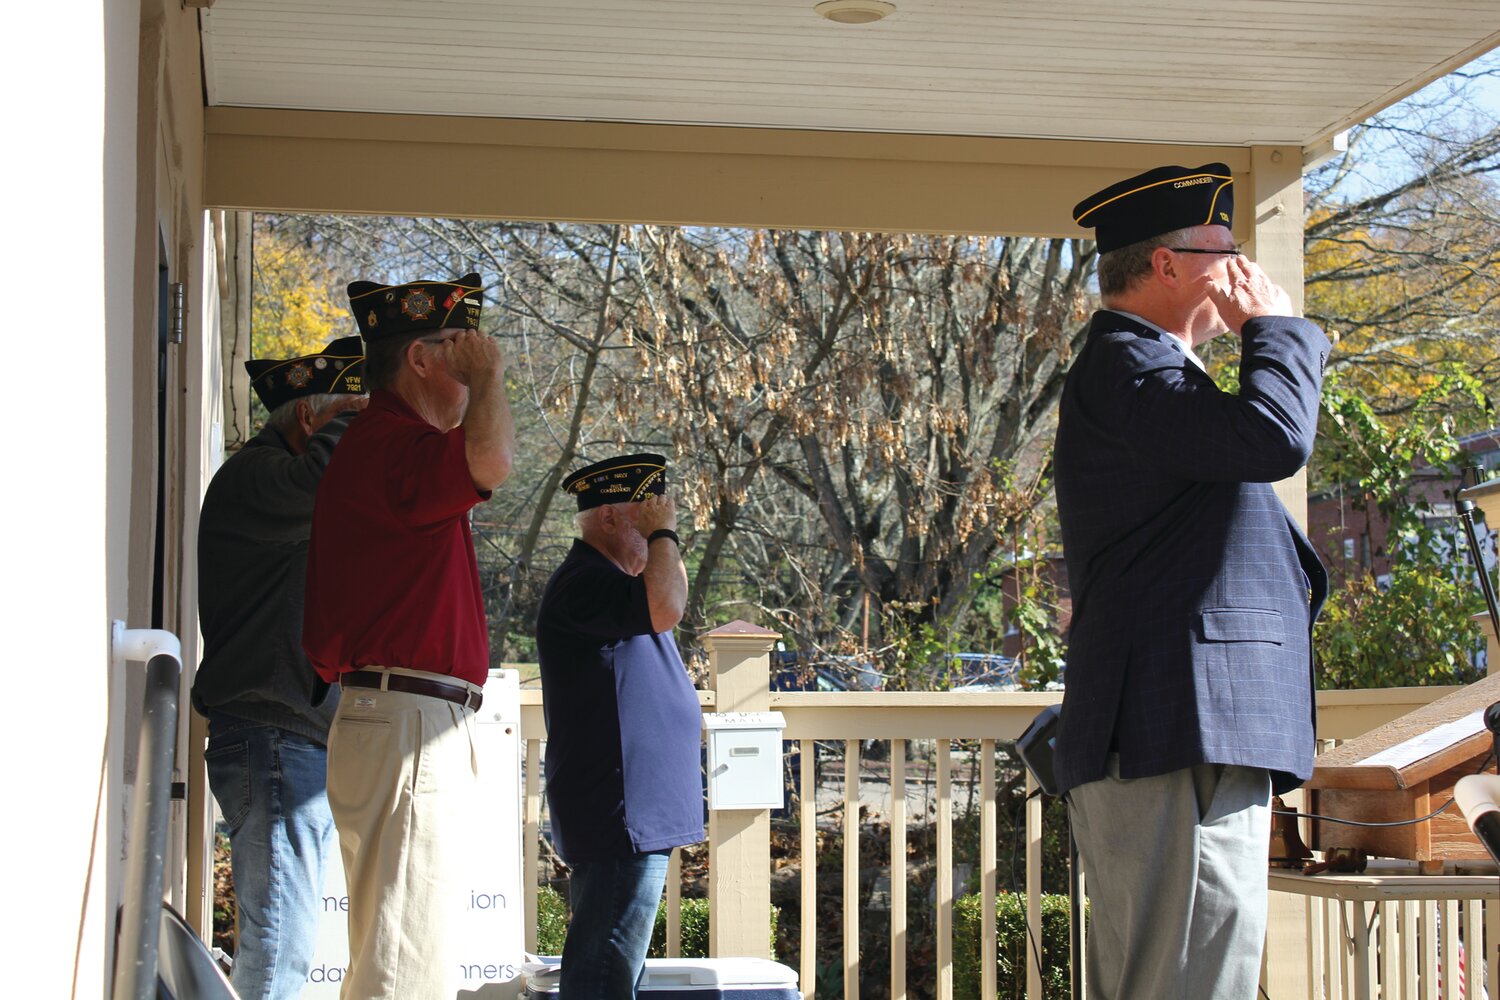 John Colna, chaplin; Georg Hambach, VFW 7921 commander; Norb Rosso, American Legion past commander; and Bob Miller, American Legion Post 120 commander, salute the flag at the Veterans Day ceremony in Lambertville, N.J.